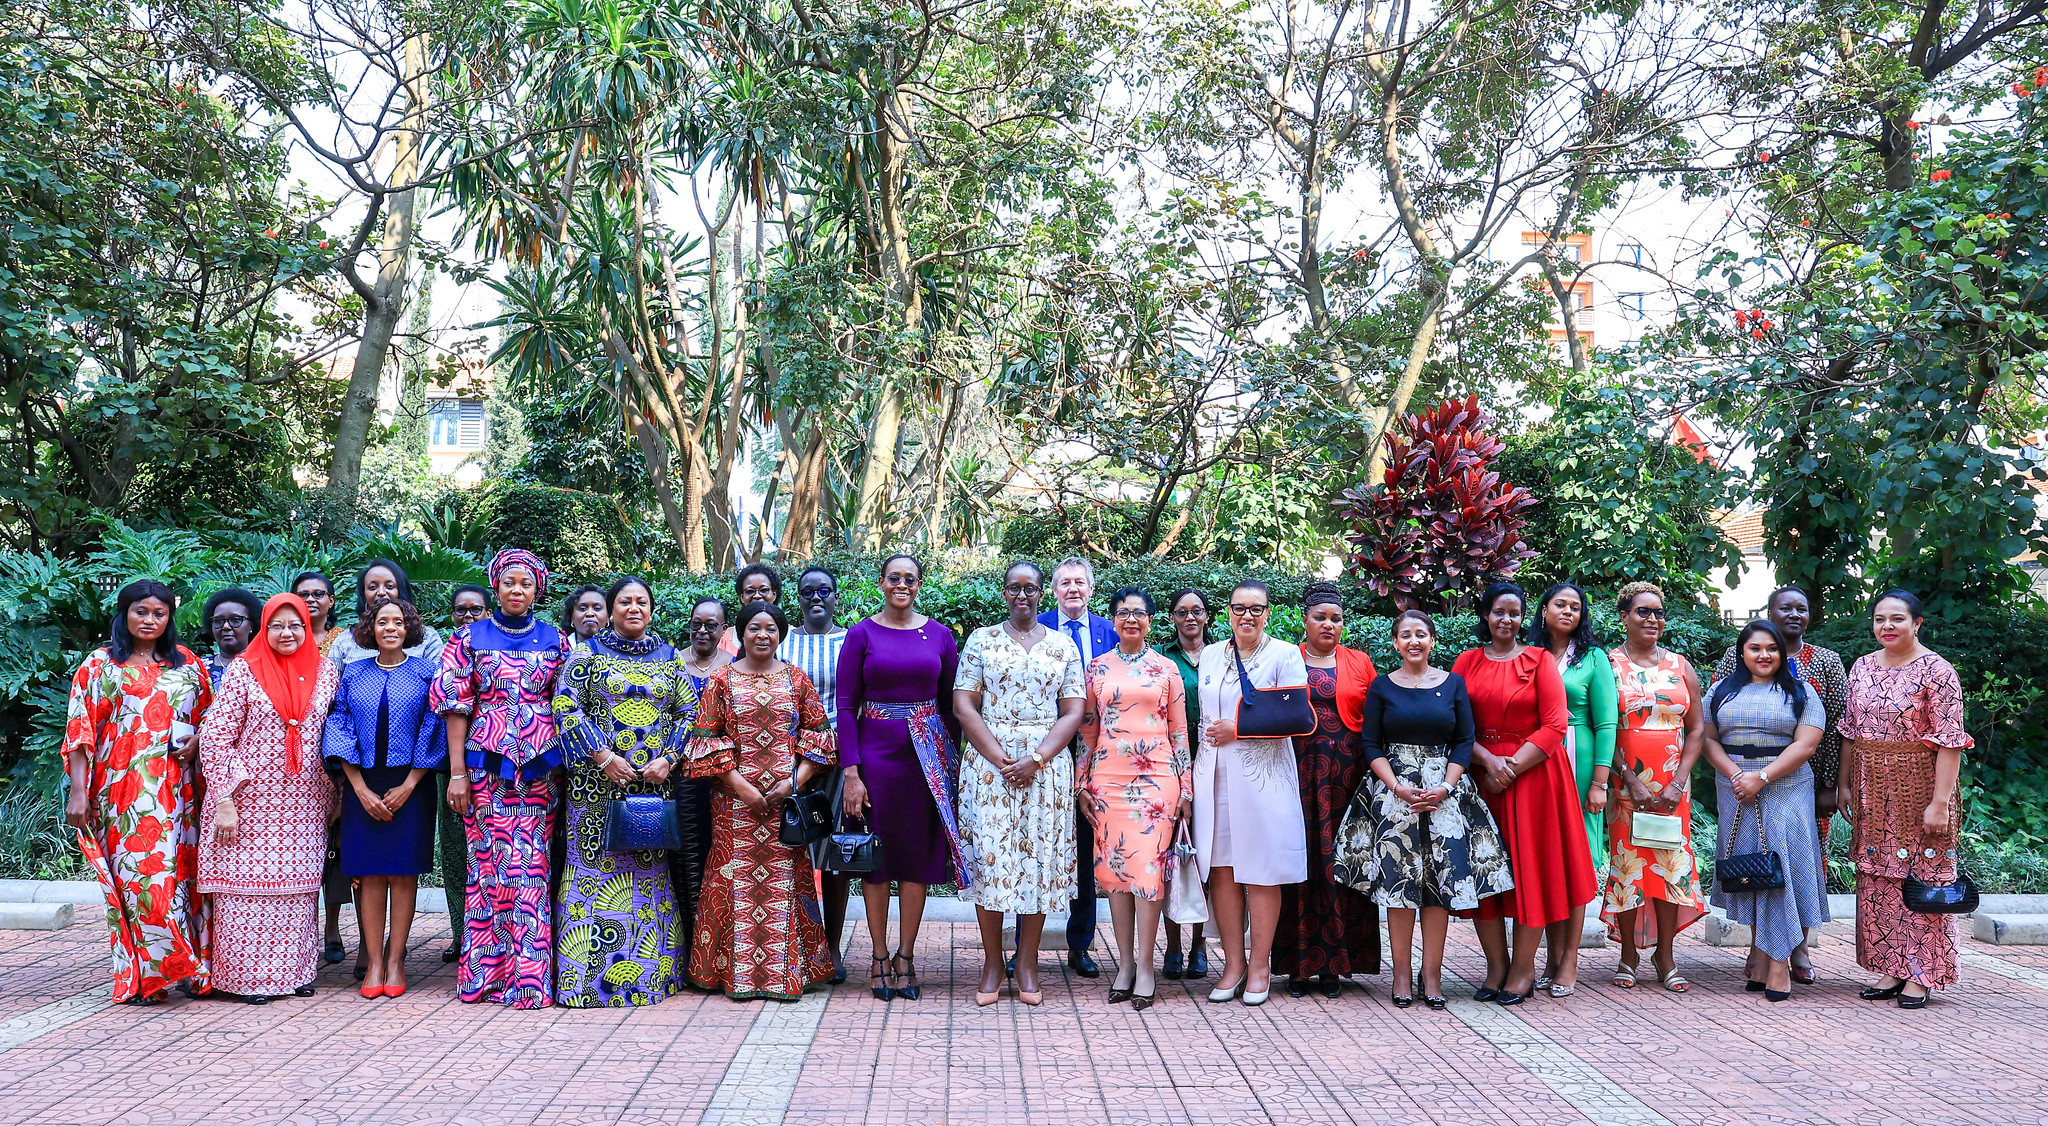 The First Ladies and Patricia Scotland, the Secretary General of the Commonwealth pose for a picture after breakfast conversation about Rwandau2019s Unity and Reconciliation journey, organised by Unity Club.